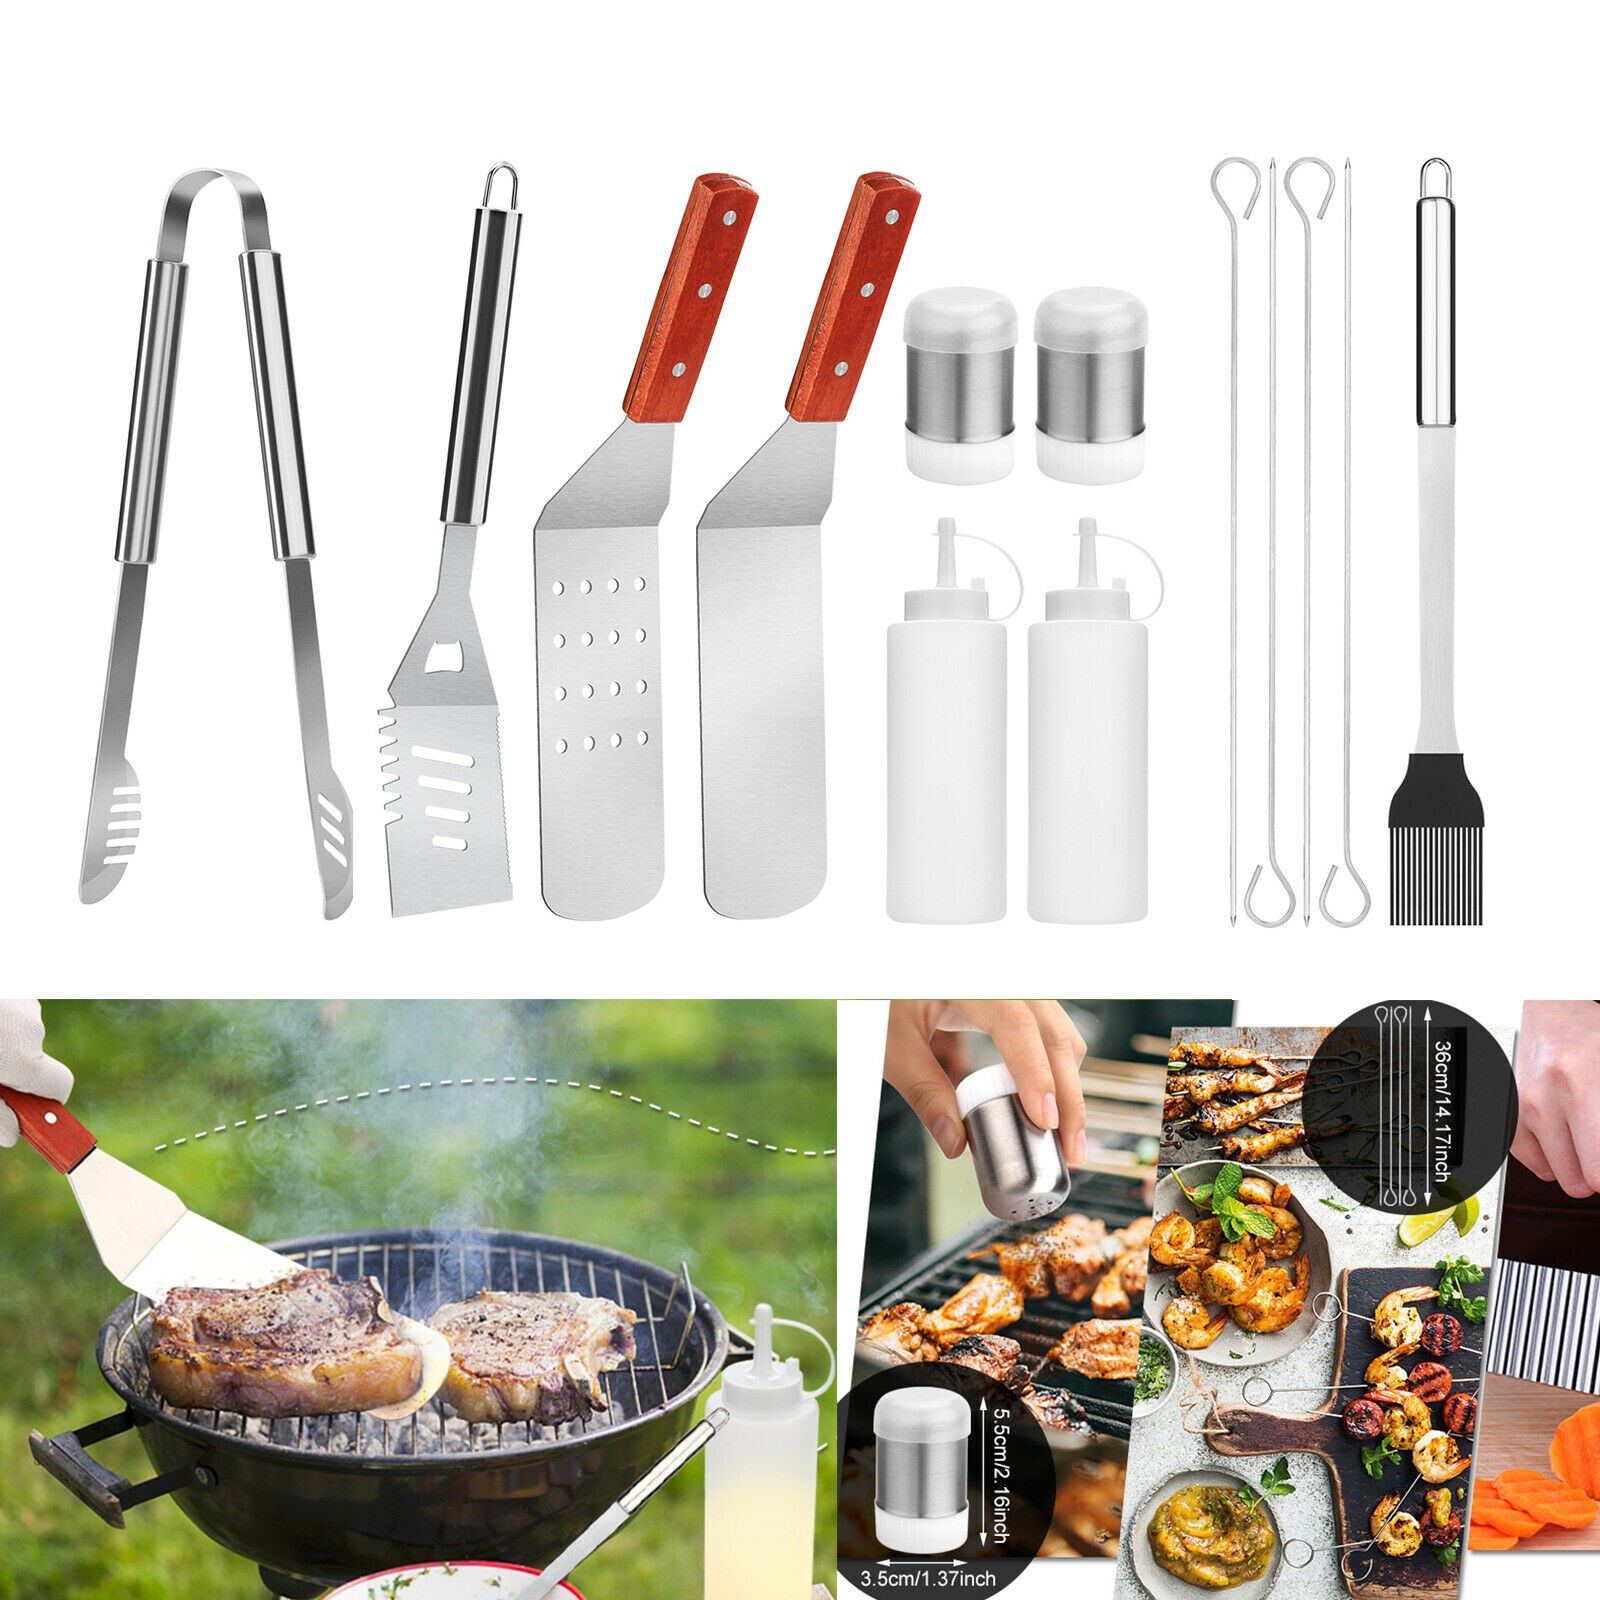 Image 1 - Stainless Steel BBQ Grill Tool Set Spatula Camping Barbecue Cutting Utensils Kit